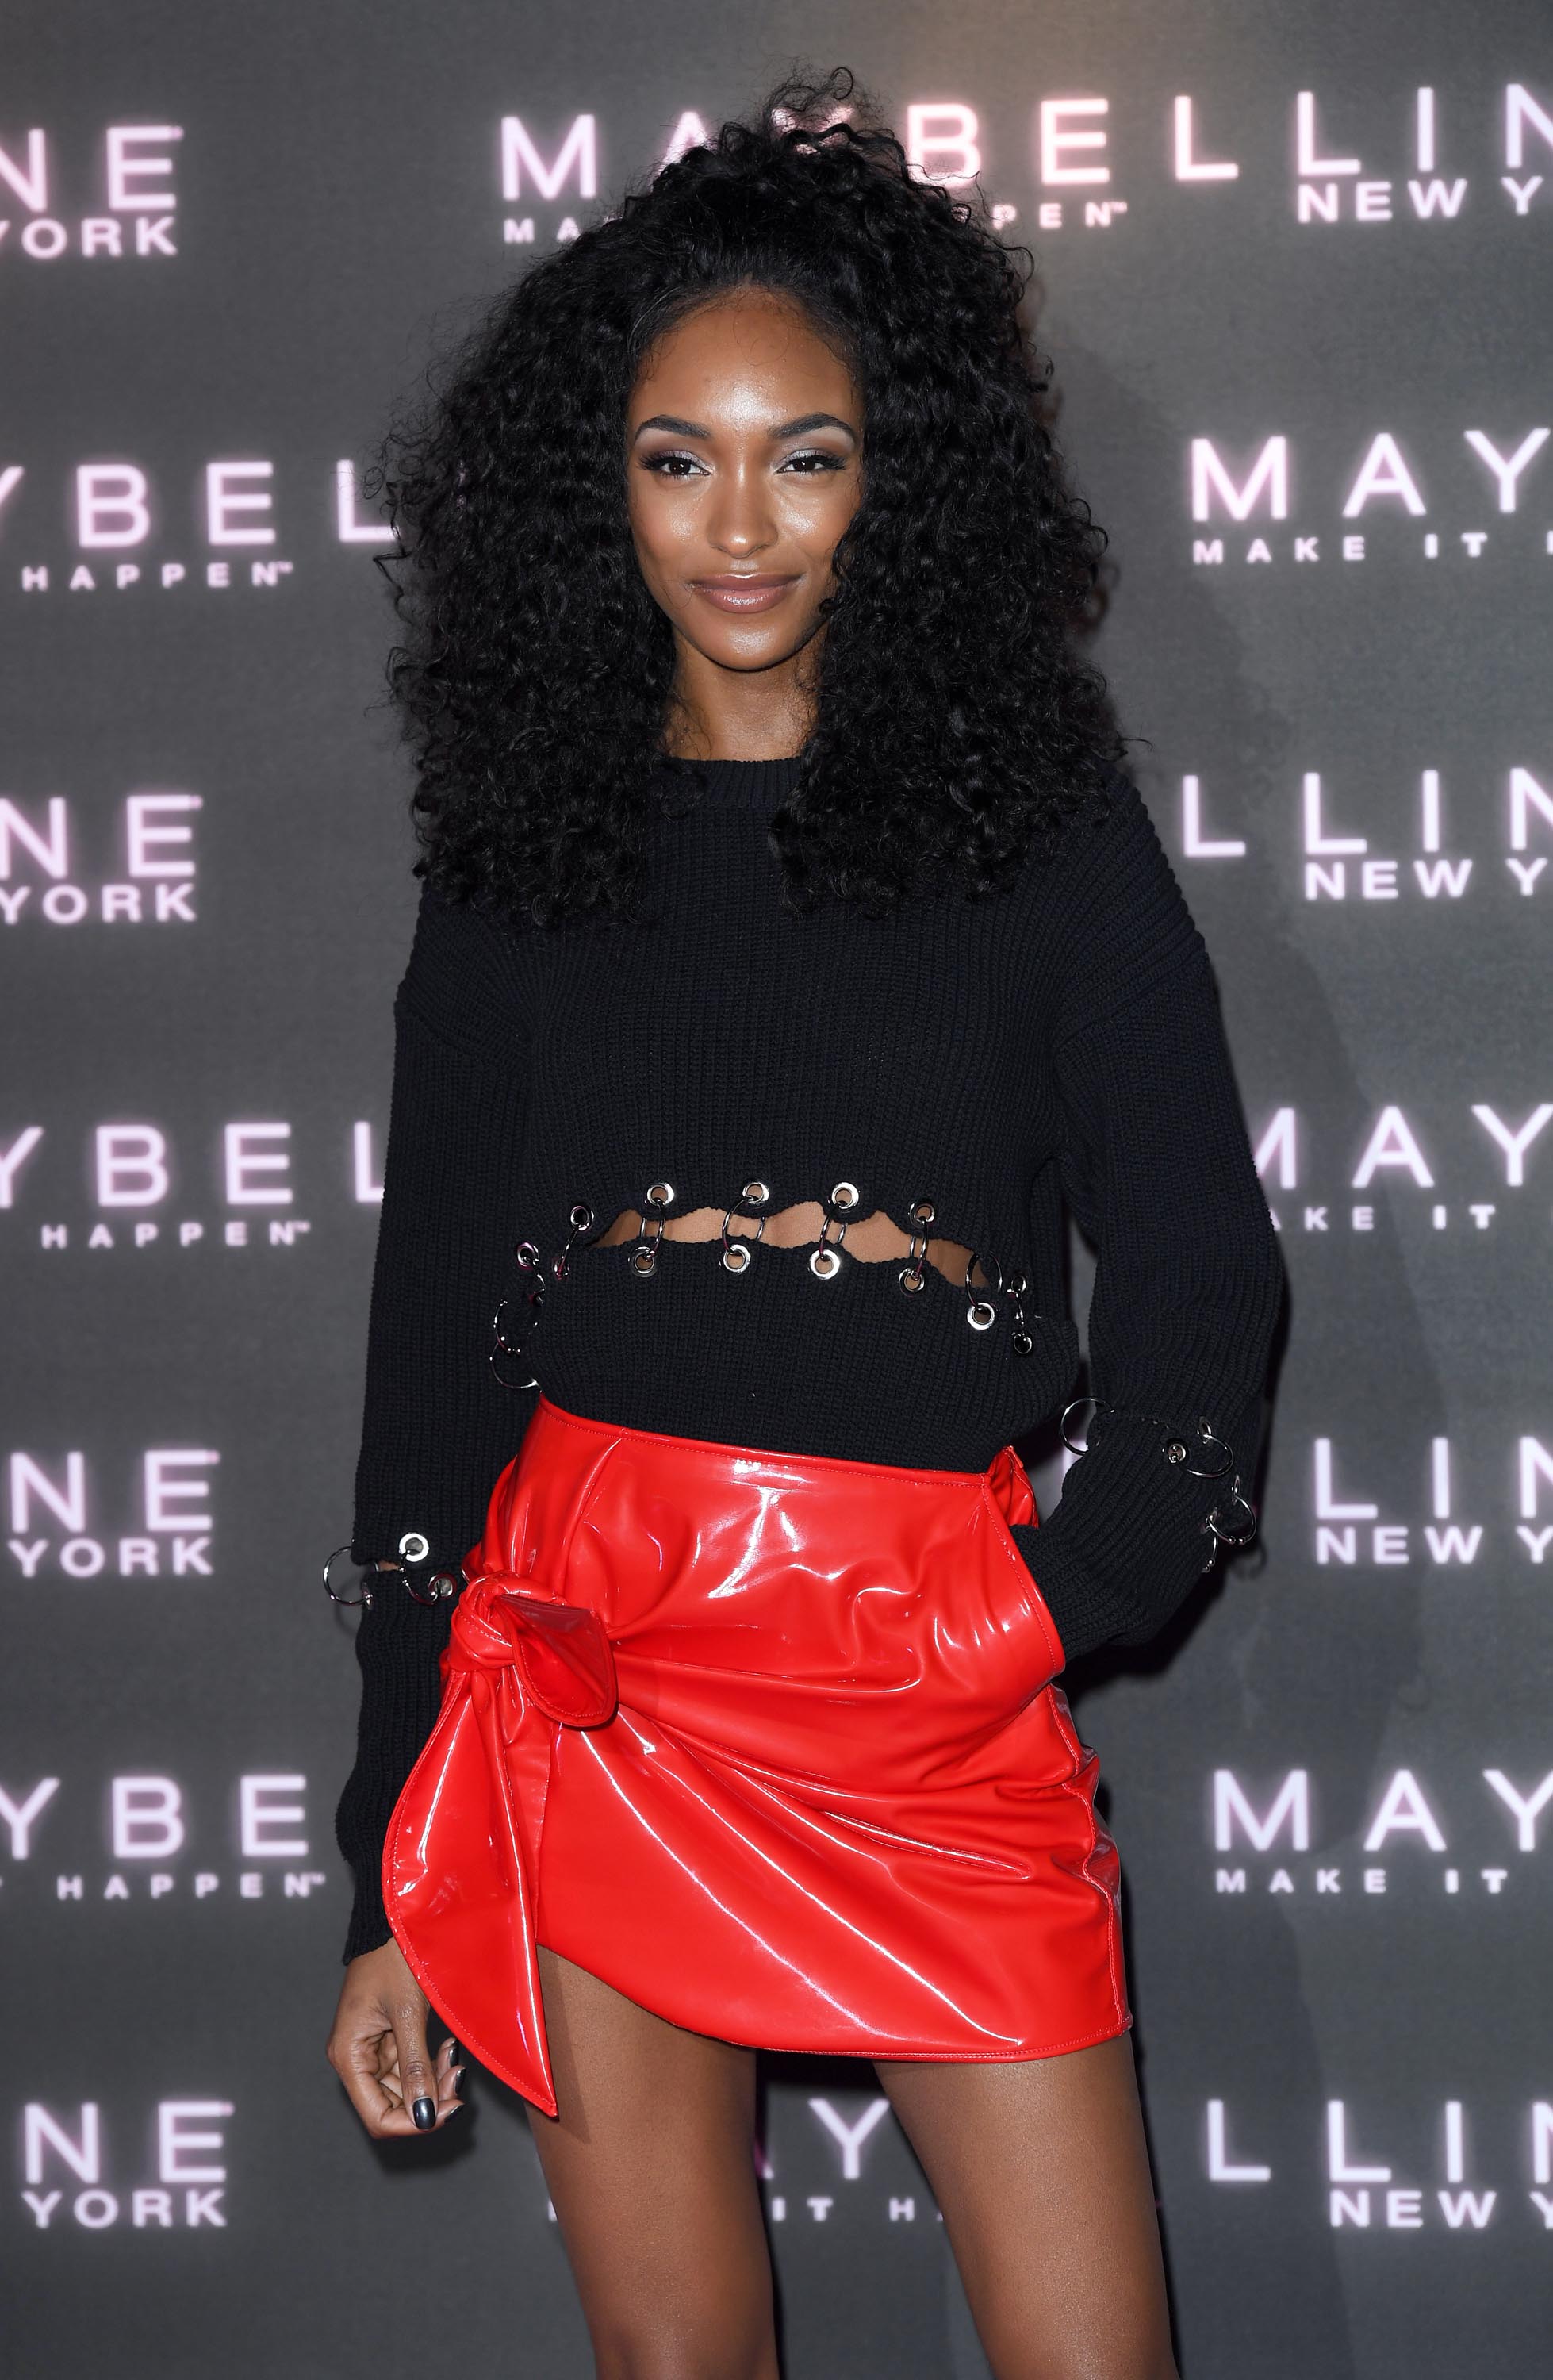 Jourdan Dunn attends Maybelline’s Bring On The Night Party